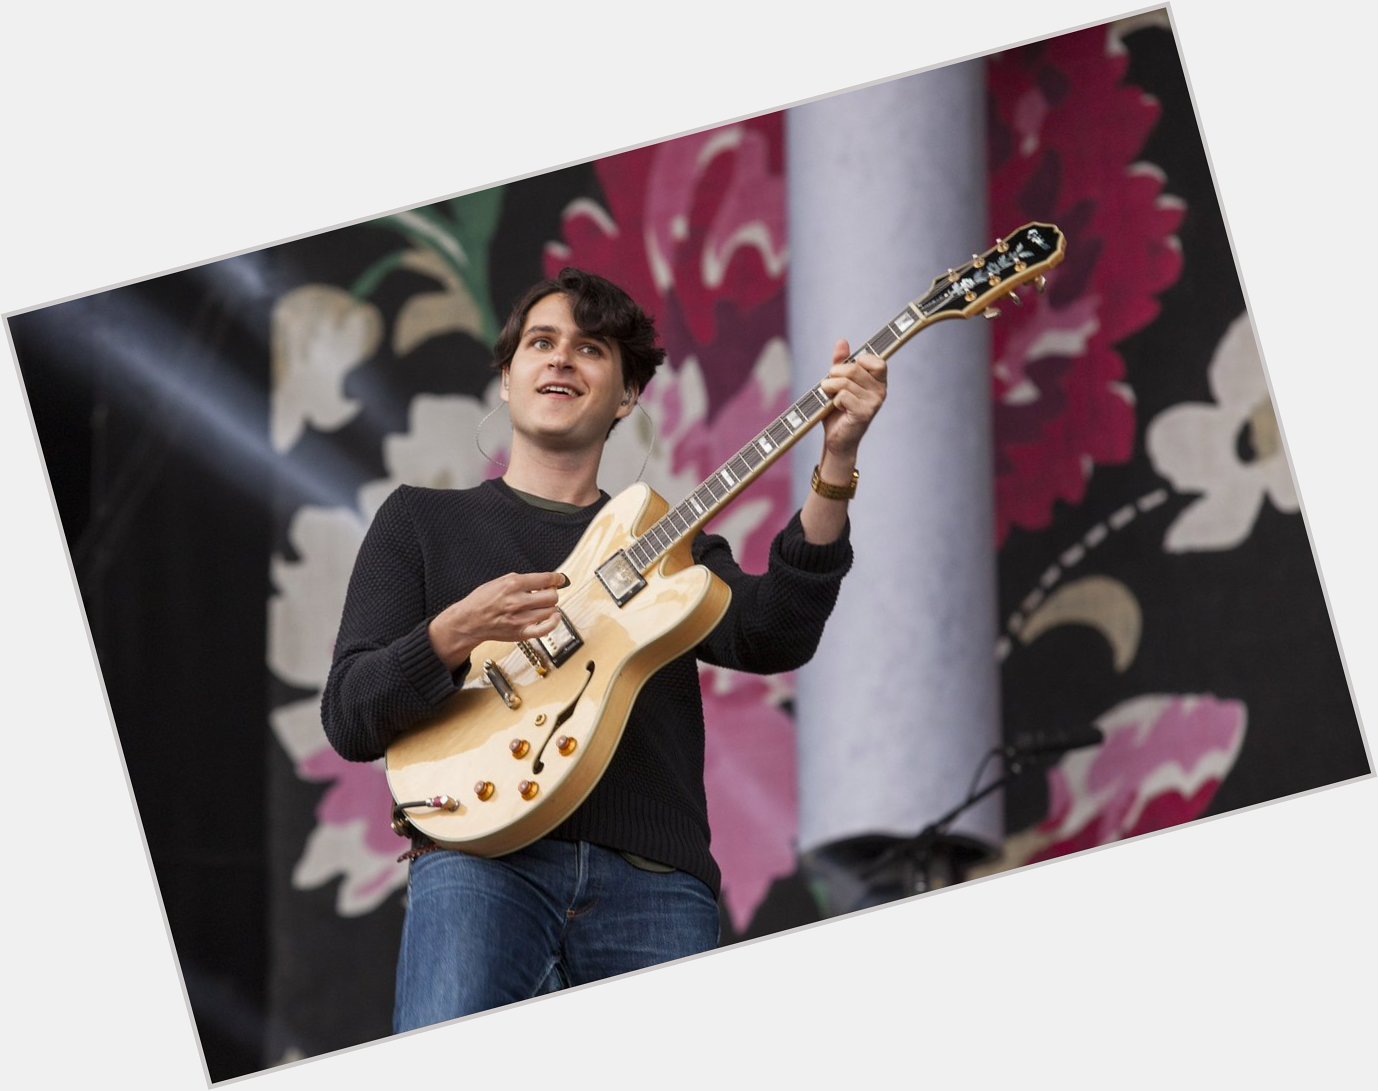 Happy Birthday to Ezra Koenig of born on this day in 1984 in NYC. Also creator of   